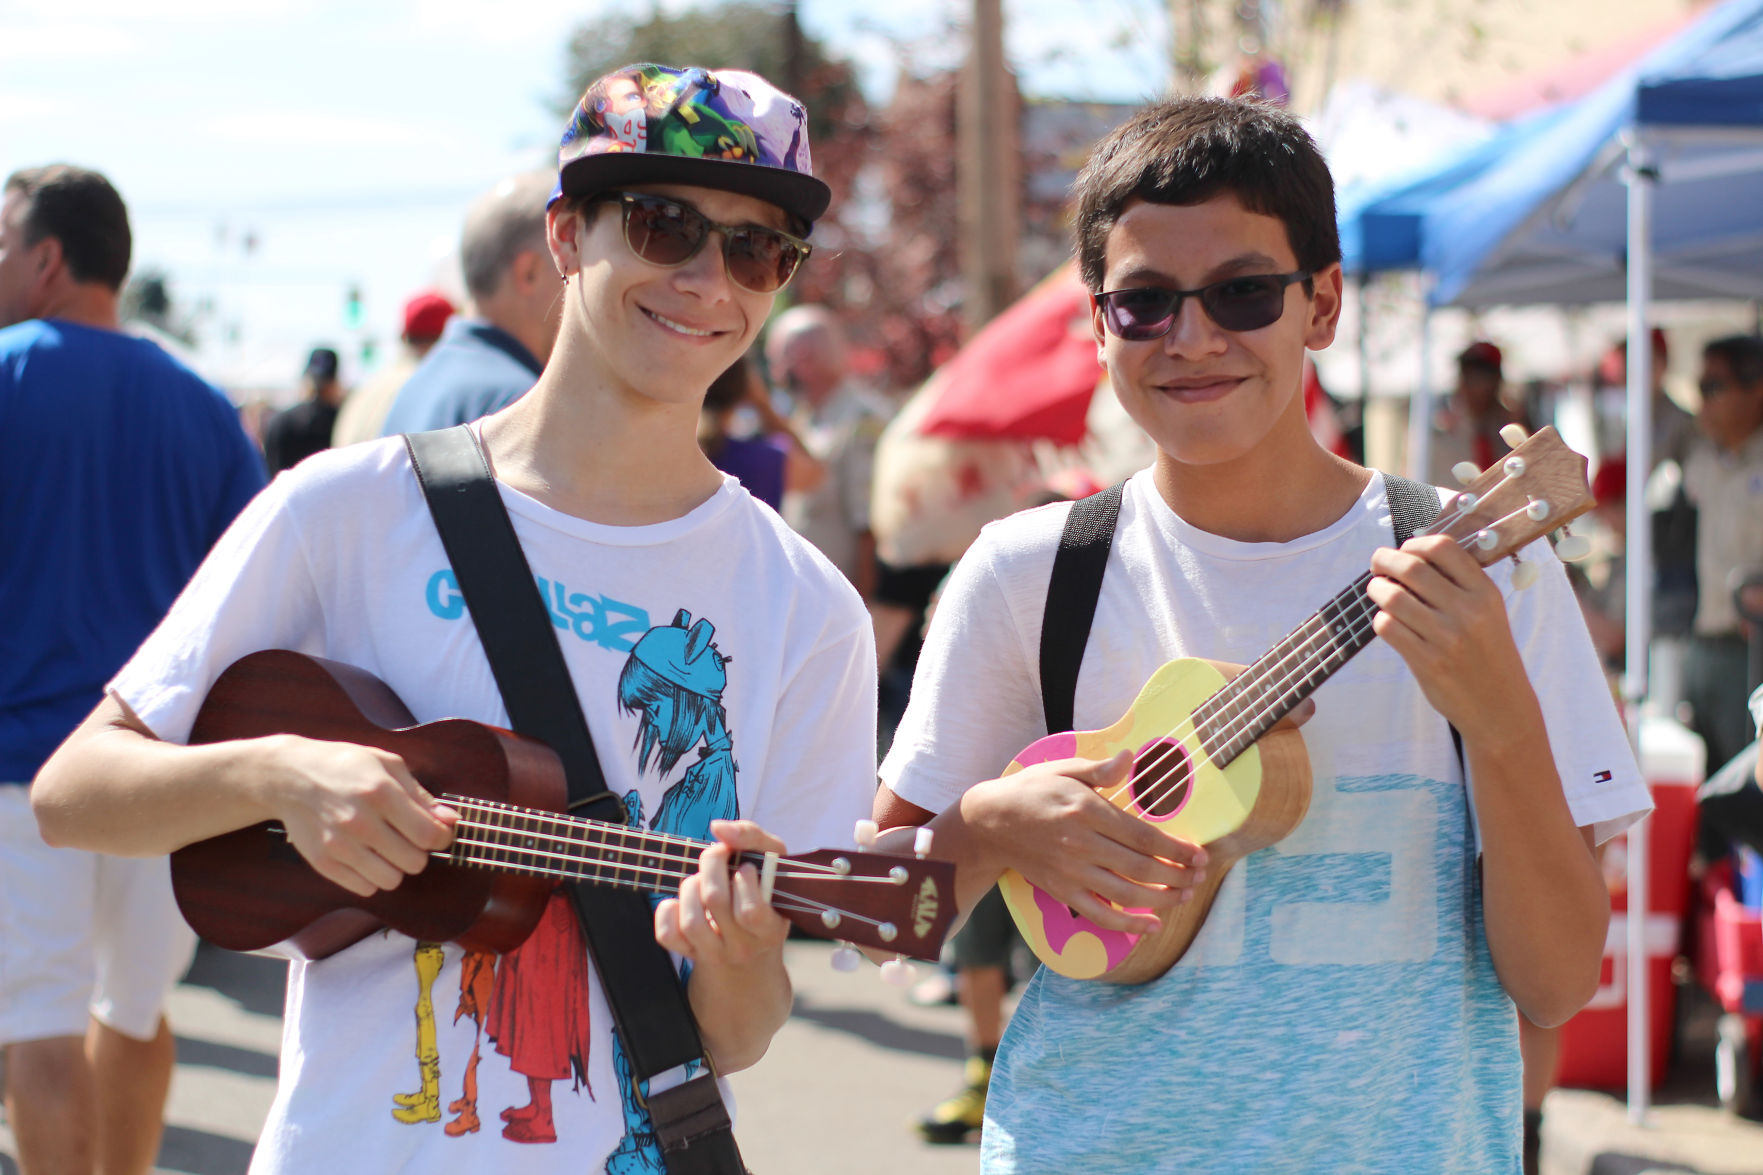 

<p></noscript>The sun was high and the day was warm as New Hyde Park residents and businesses gathered for the community’s 21st annual street fair.</p>
<p>” /><br />
<img width=